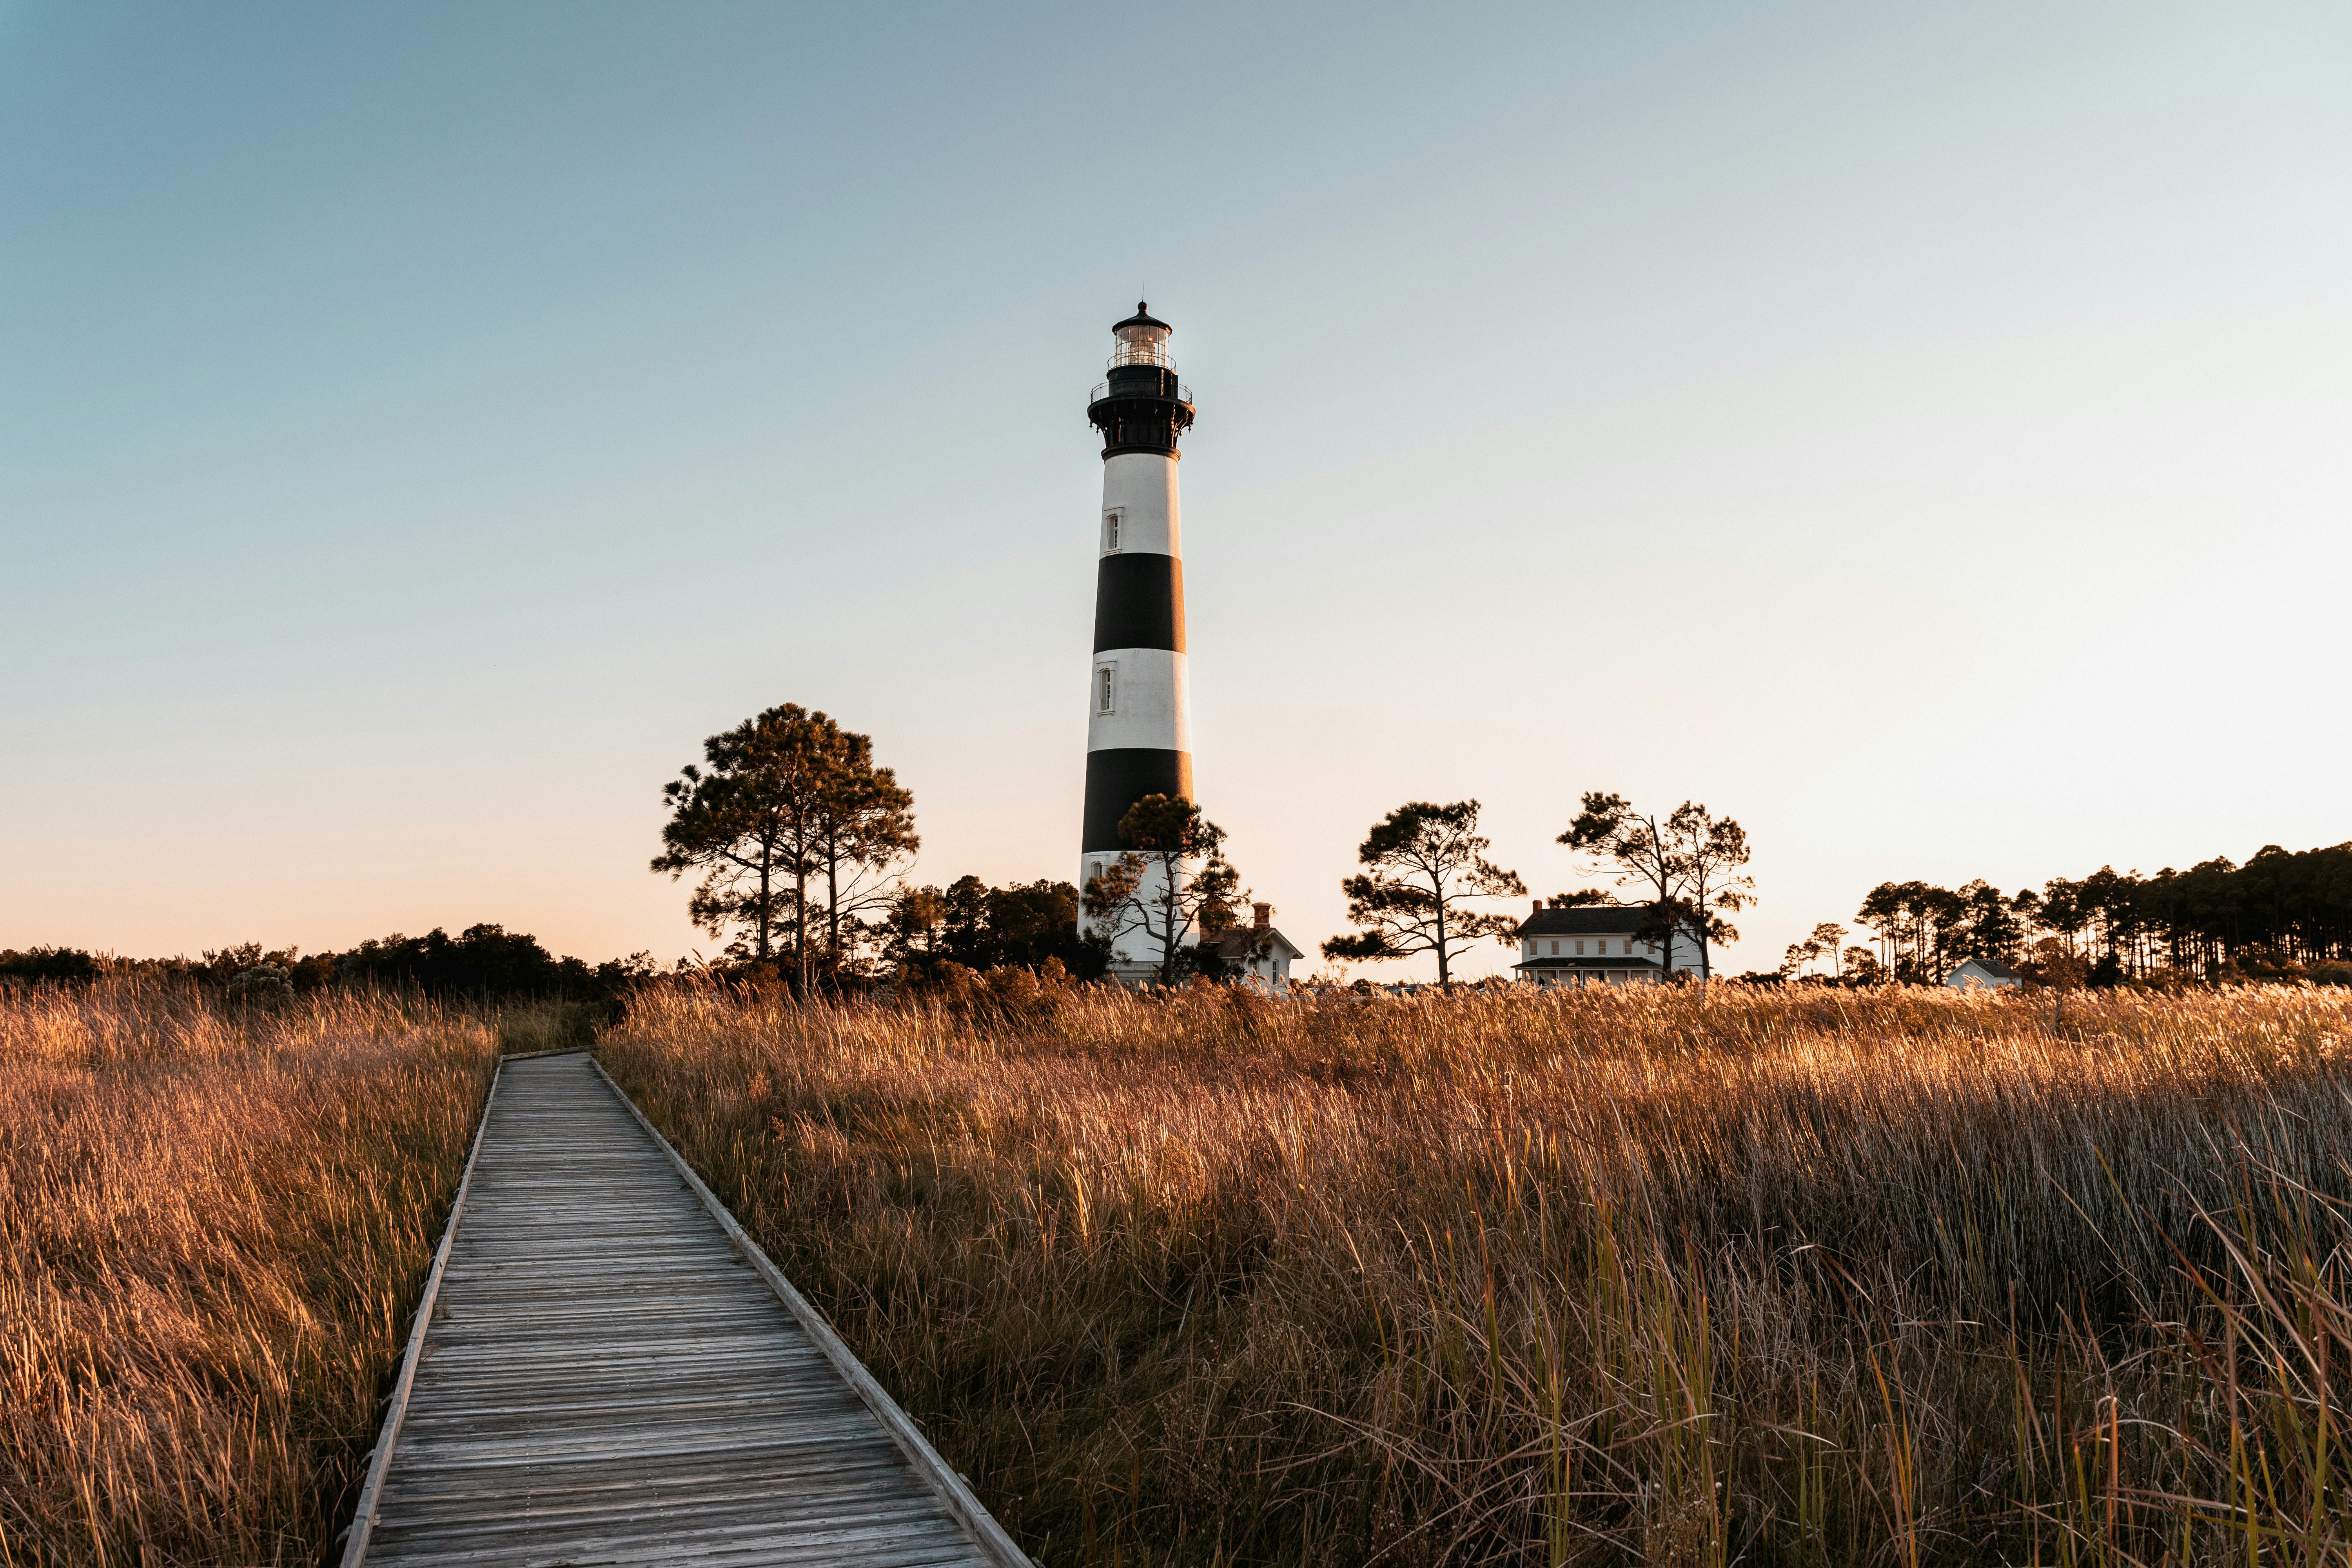 Taken during golden hour at Bodie Island Lighthouse in Nags Head, North Carolina. This is one of several lighthouses in the Outer Banks. (IG: @kyletriesphotography)